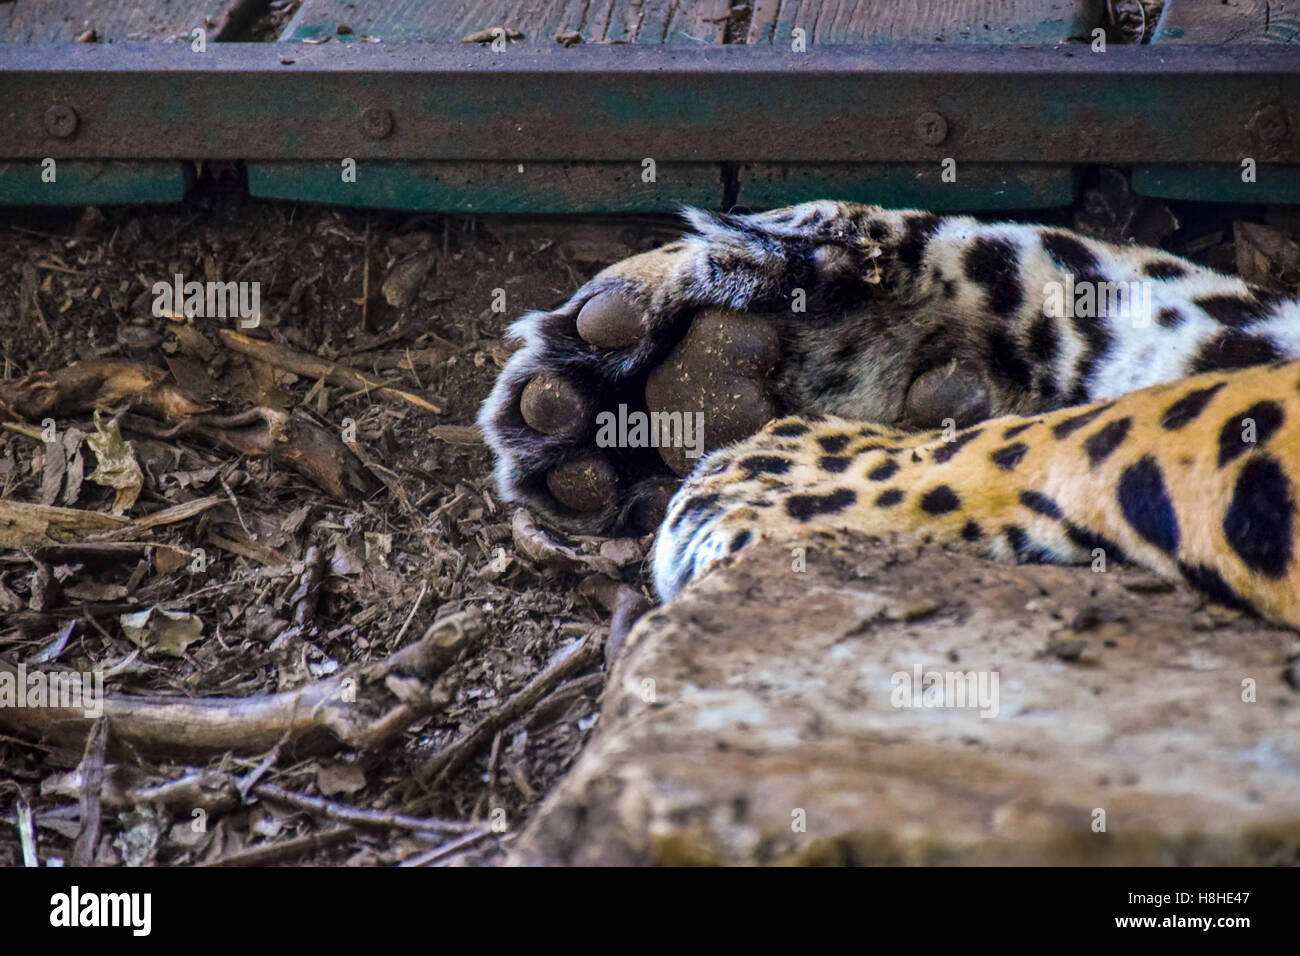 Paws of a jaguar sleeping in the zoo of Pistoia, Italy Stock Photo